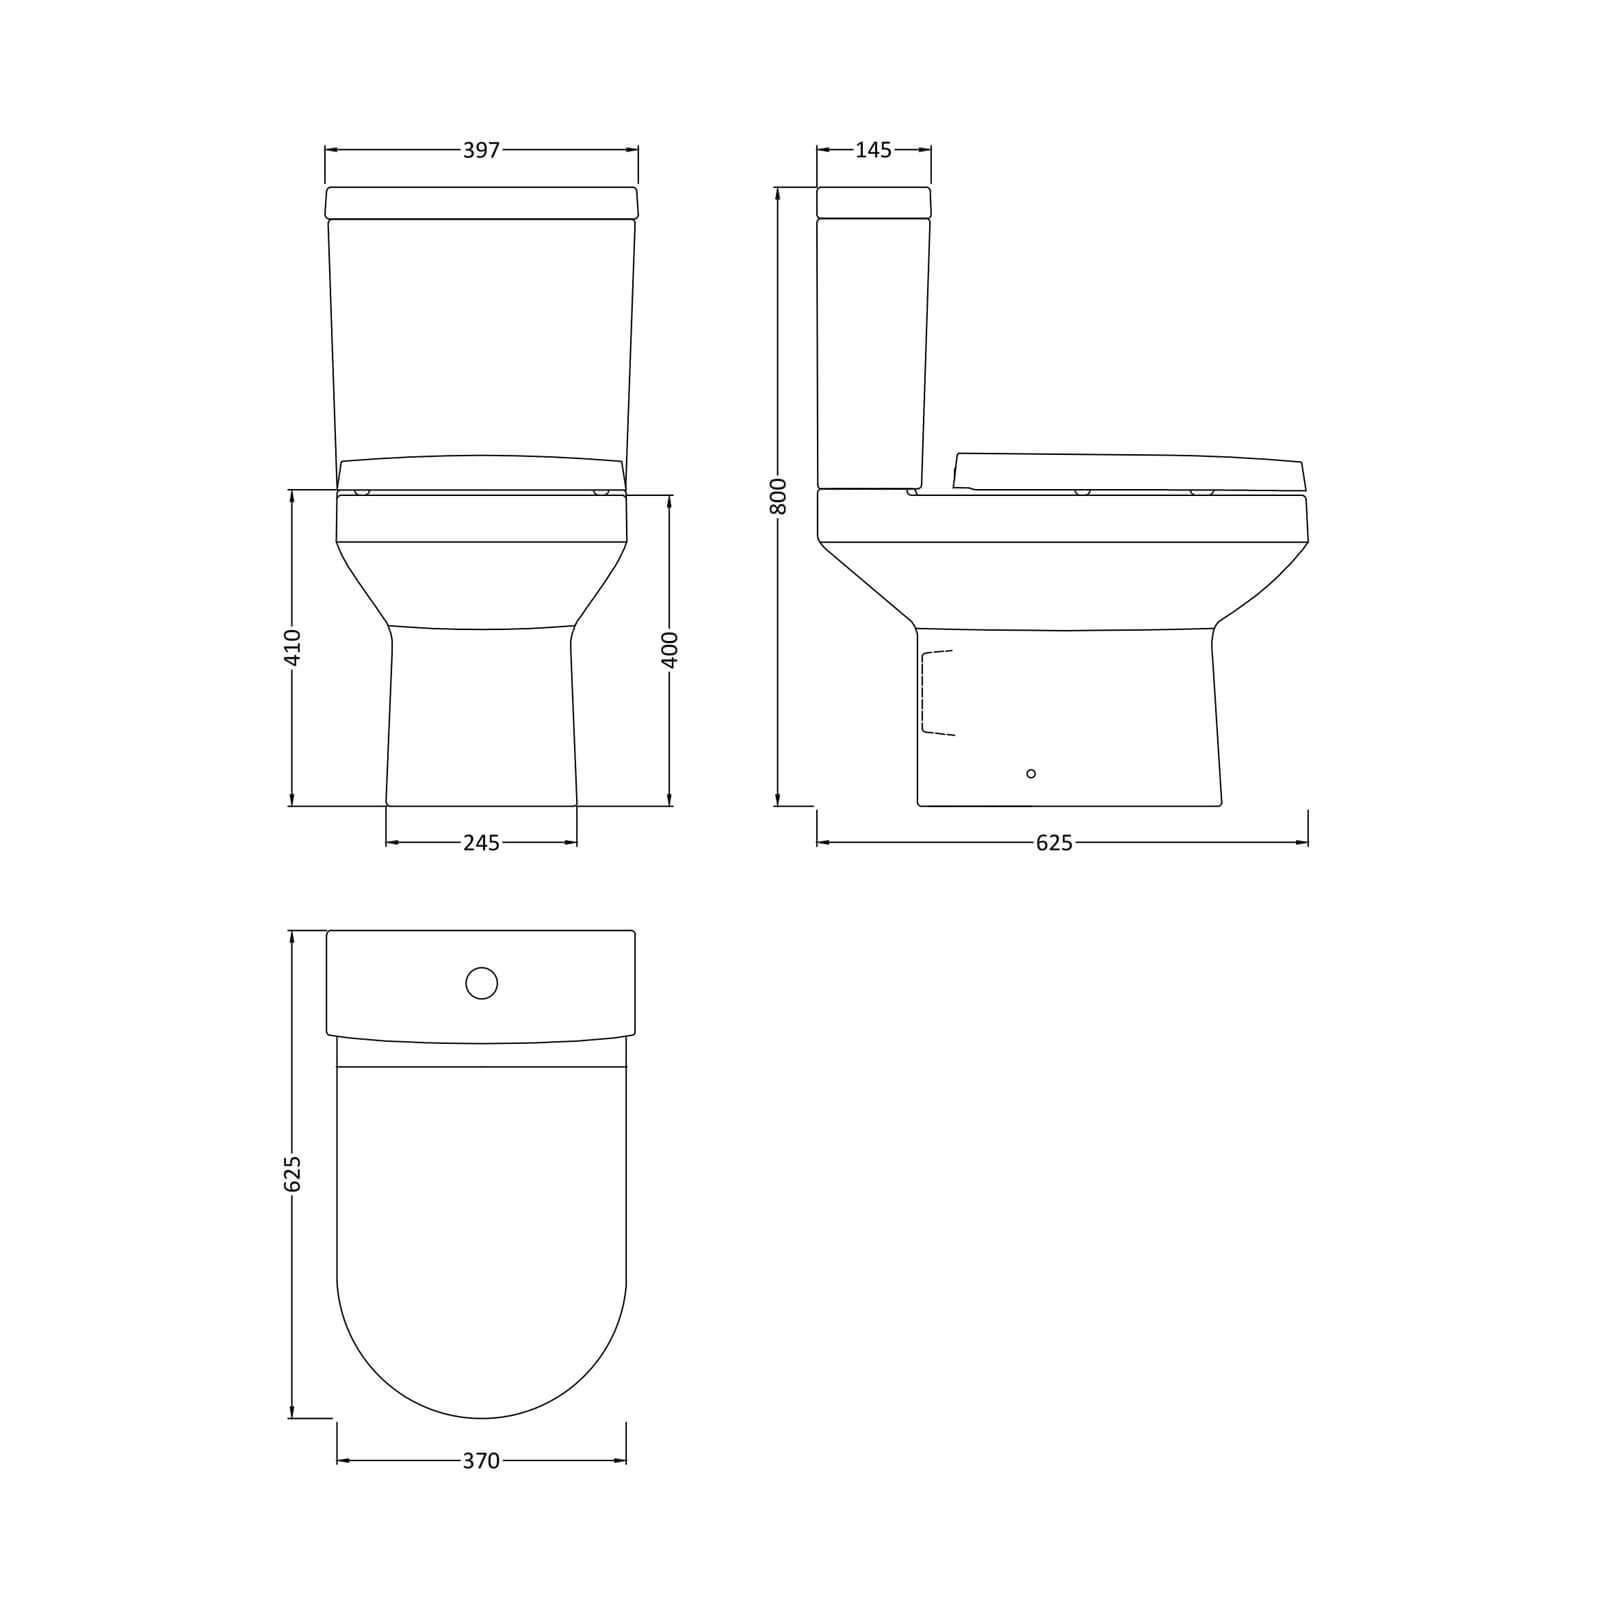 Balterley Vision Pan, Cistern and Soft Close Toilet Seat